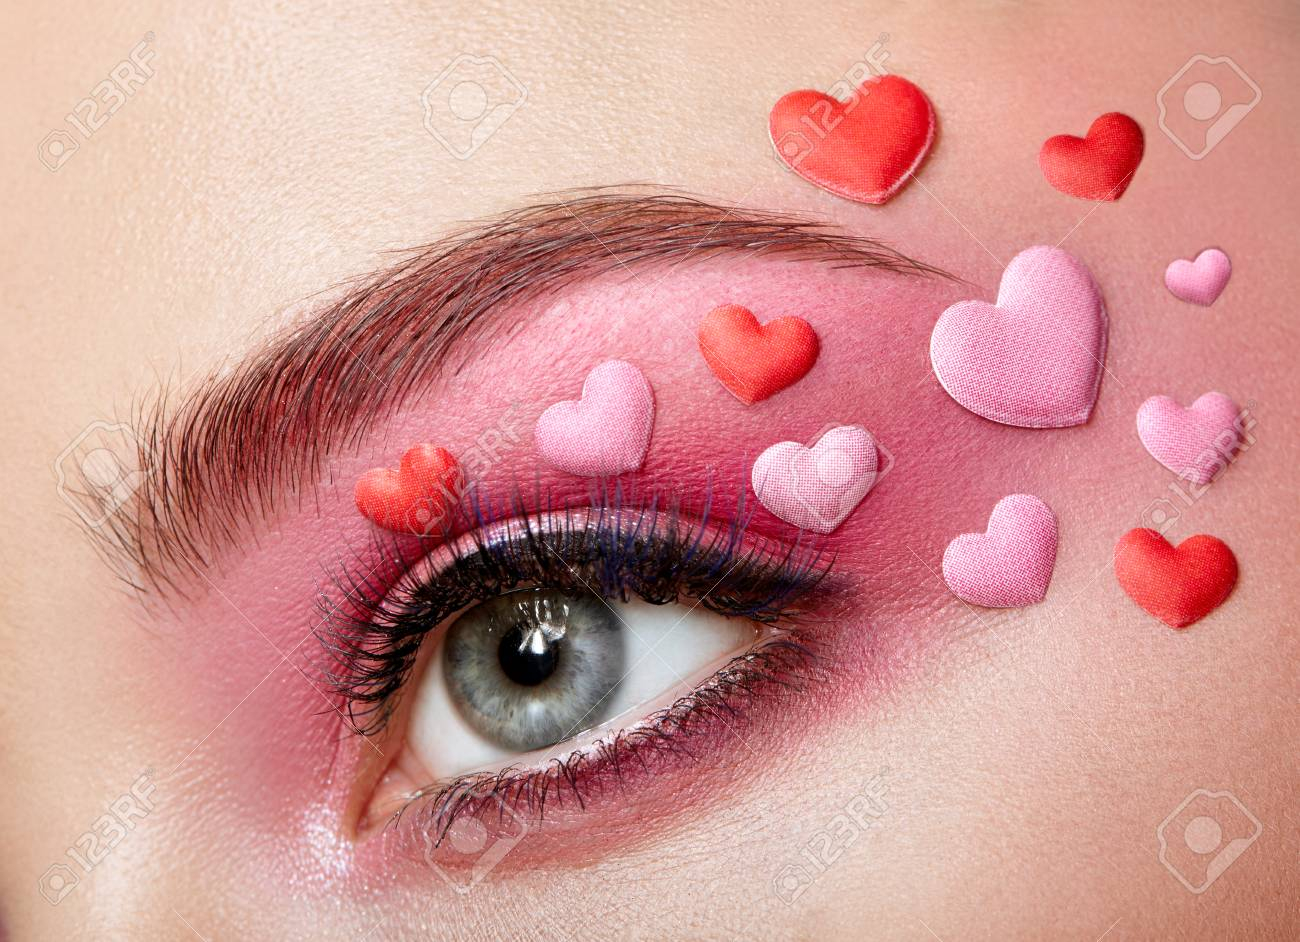 Heart Eye Makeup Eye Make Up Girl With A Heart Valentines Day Makeup Beauty